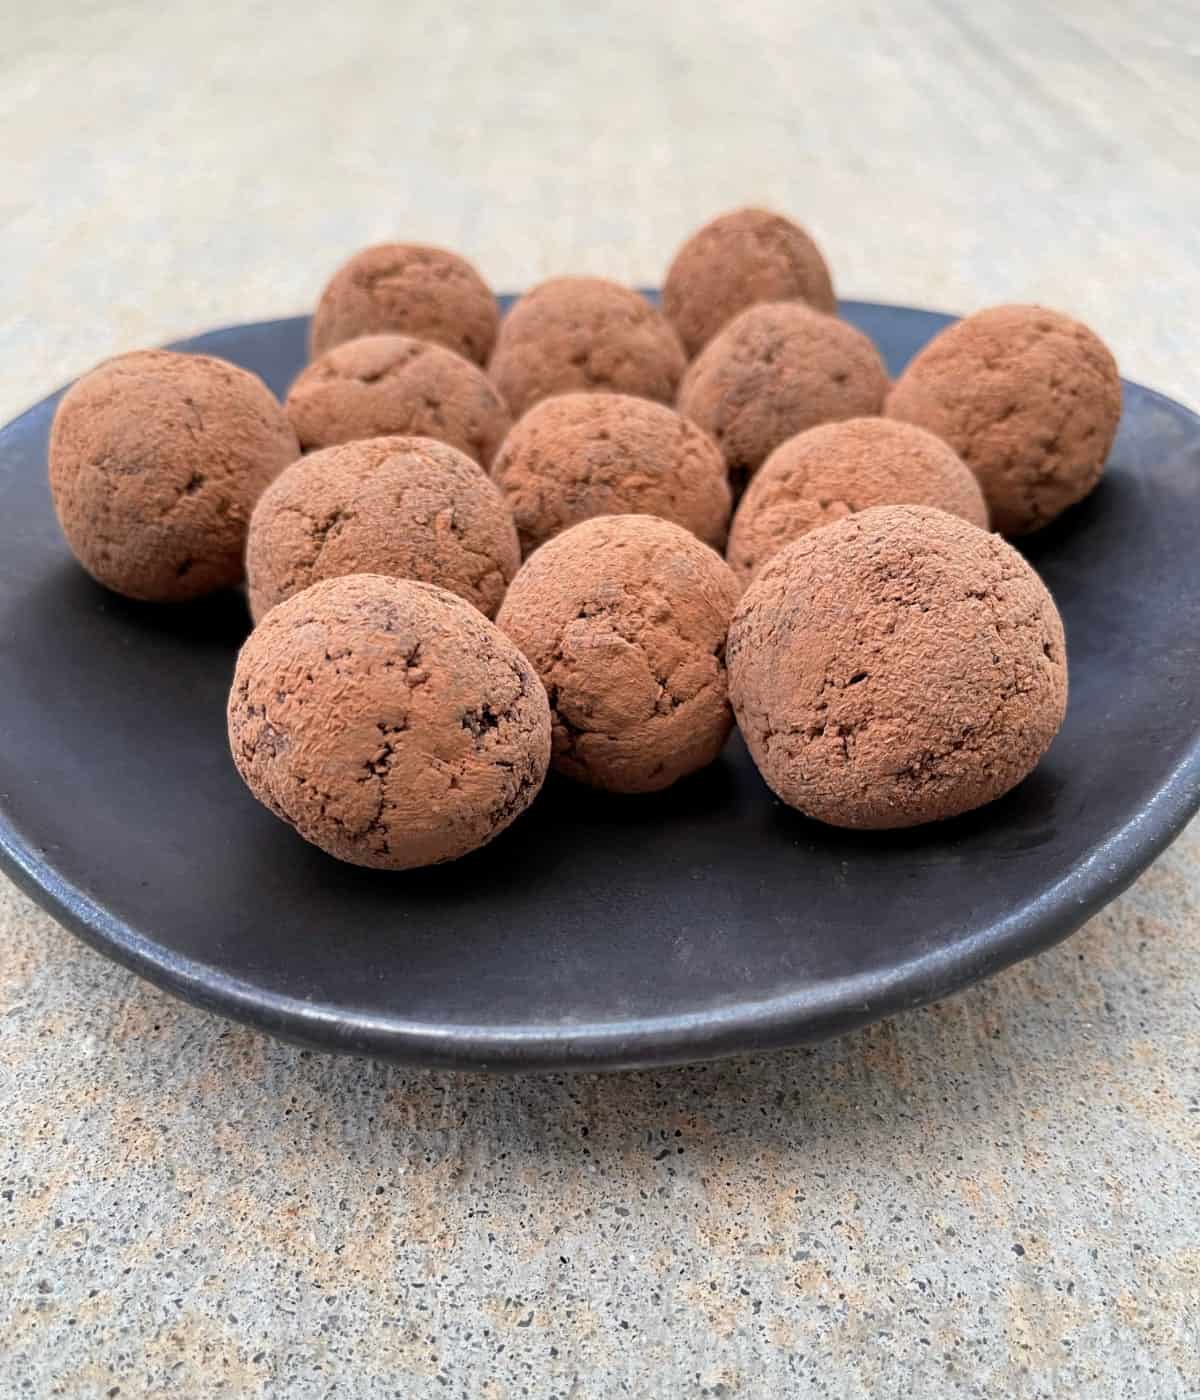 Rum balls on brown pottery serving plate.